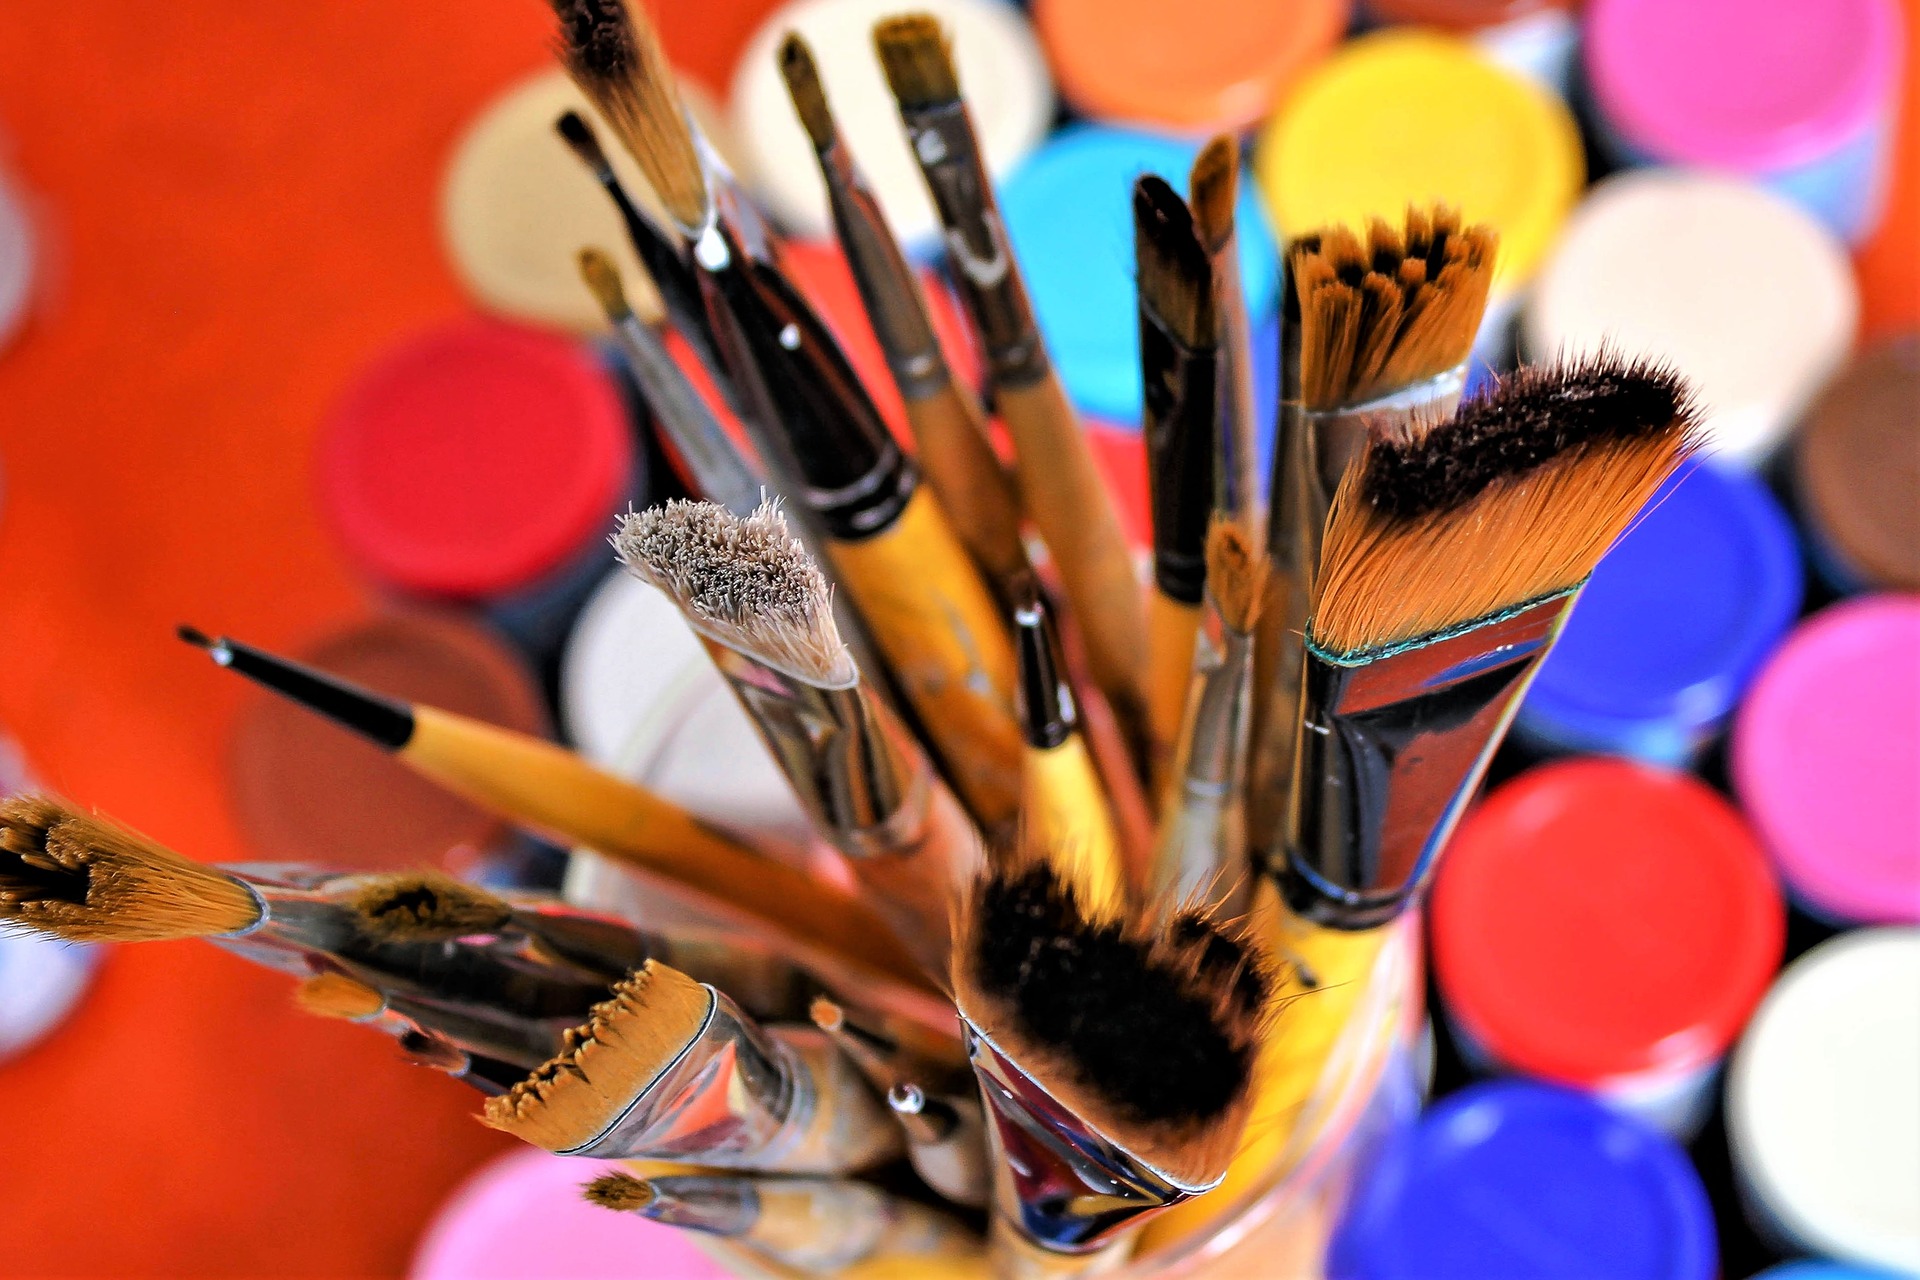 Paintbrushes with colorful paint lids.